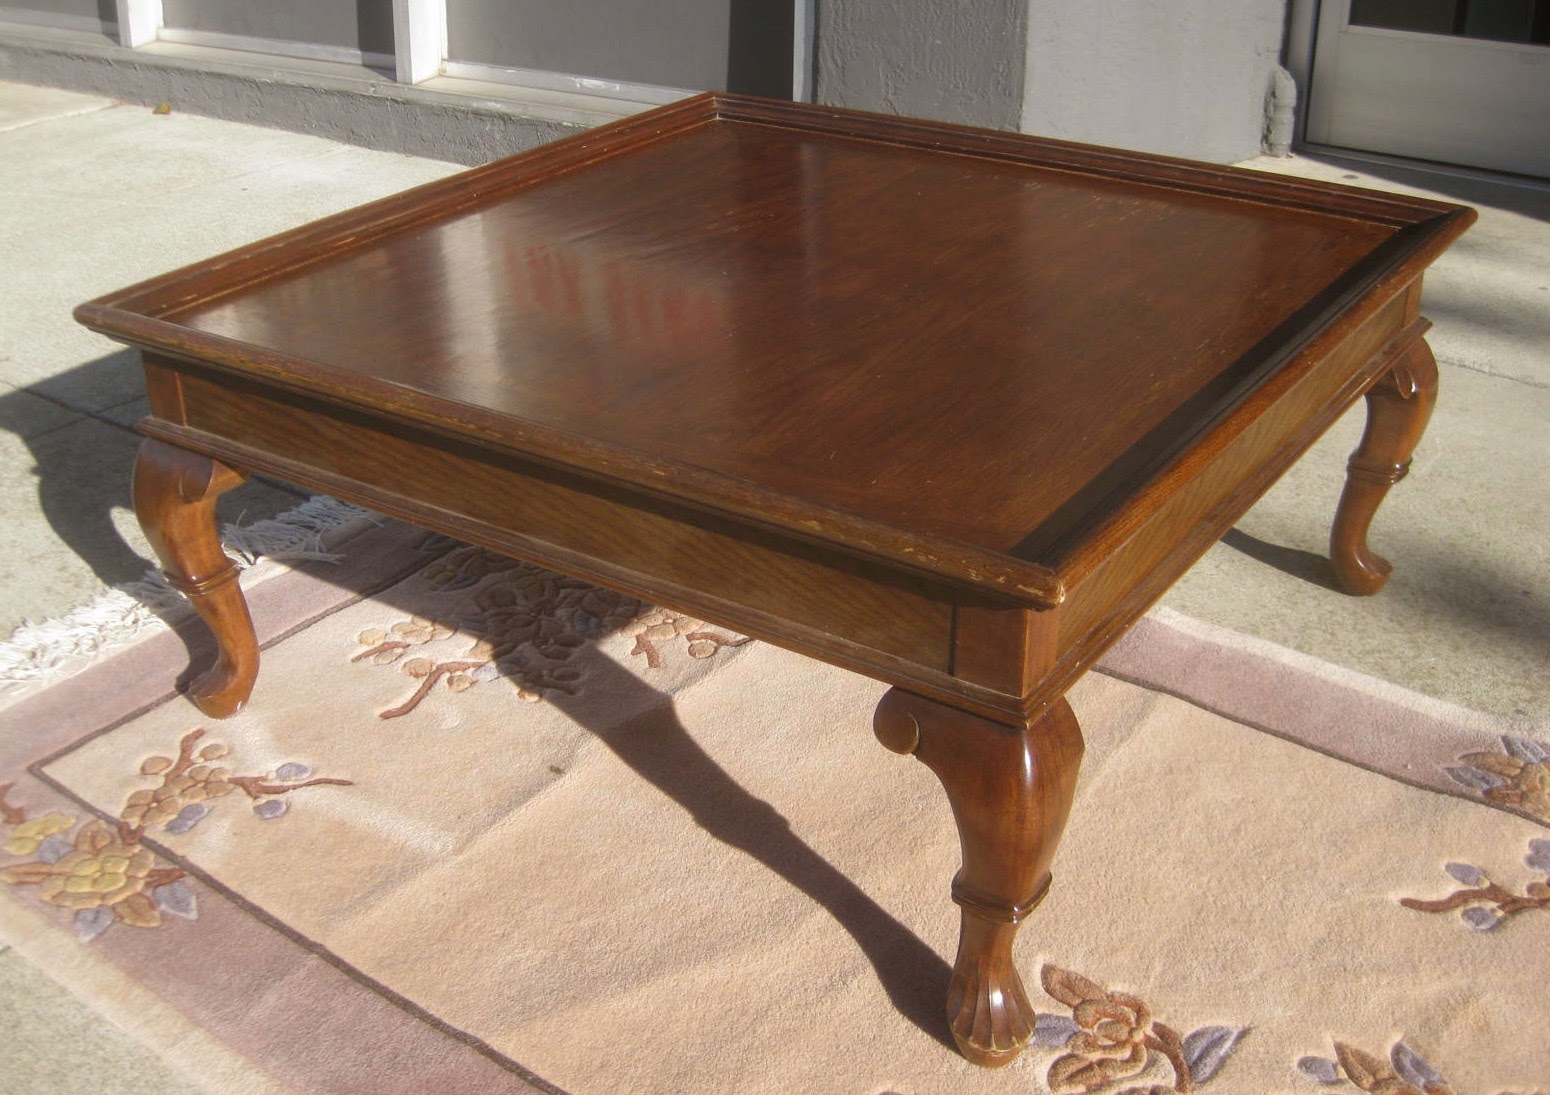 Large coffee tables square 1